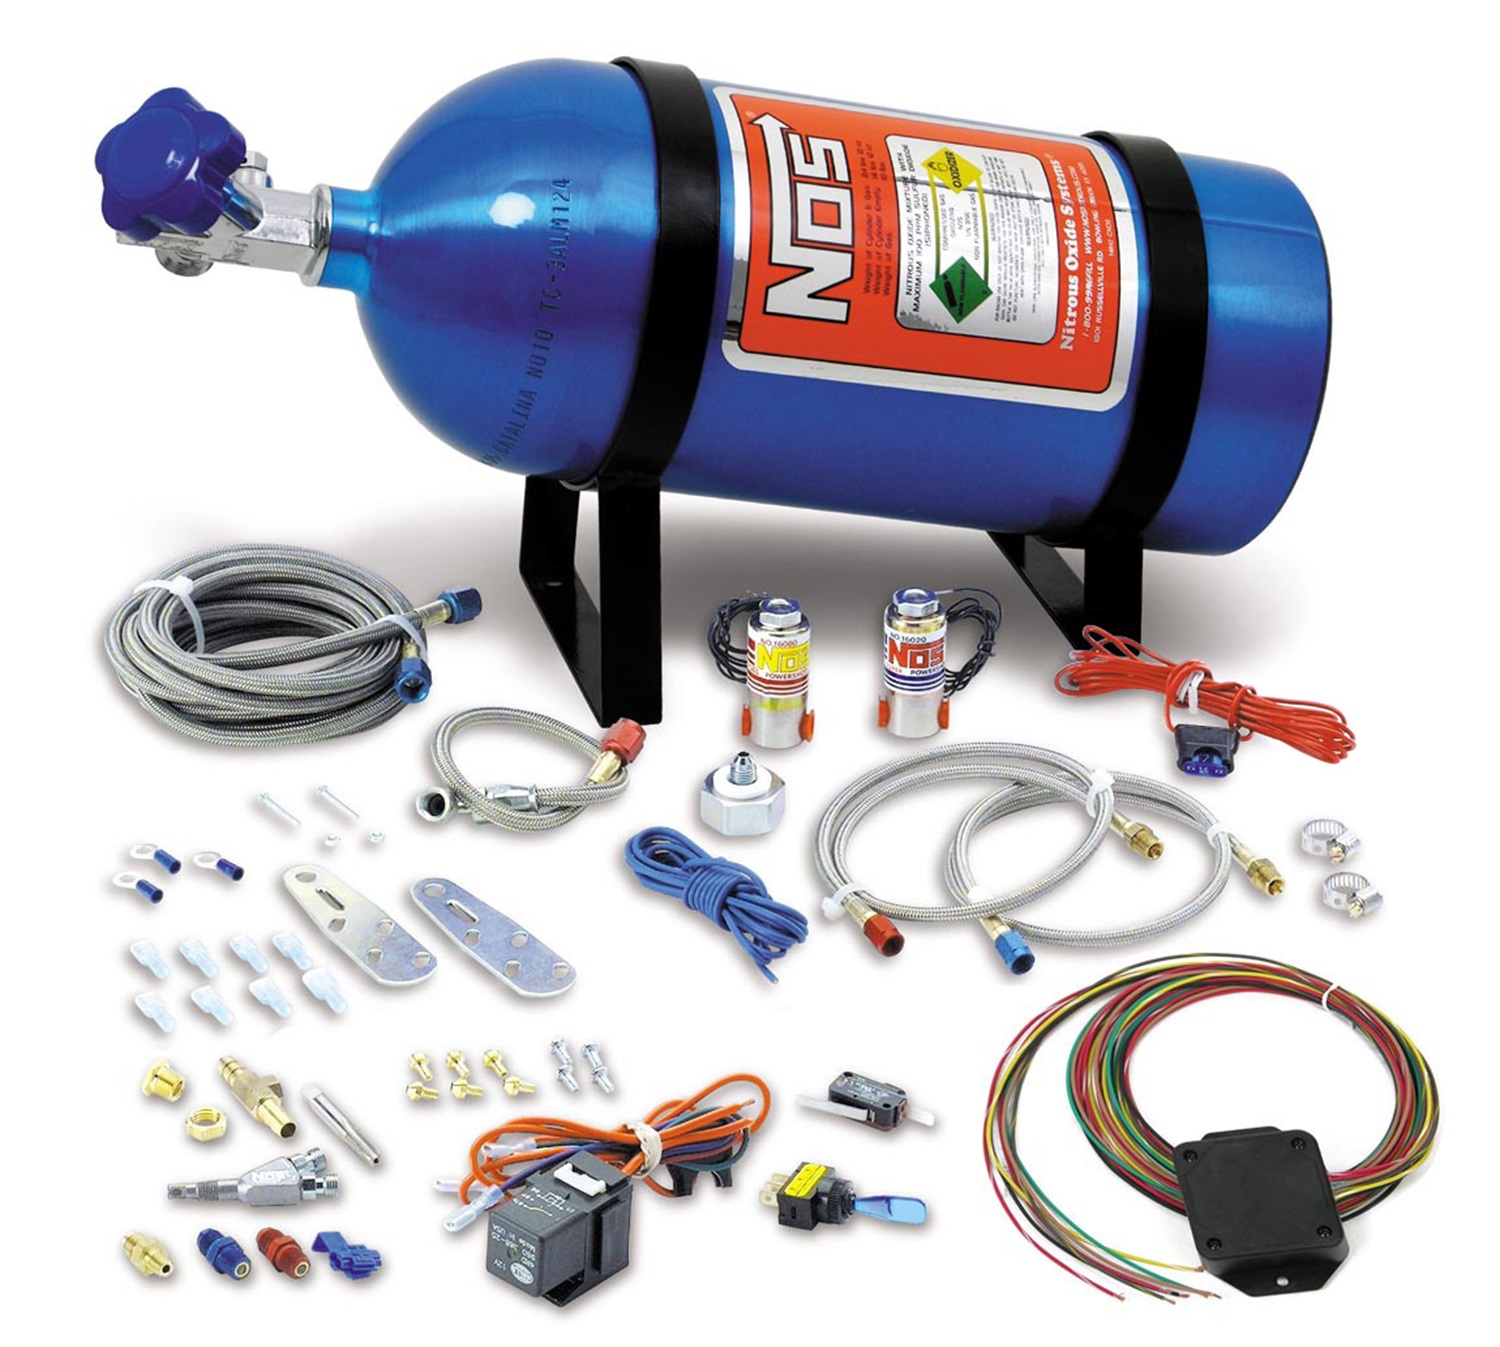 Nitrous Oxide Injection System Kit, NOS EFI Wet Kits, UNIVERSAL 8 CYL DRIVE BY WIRE KIT